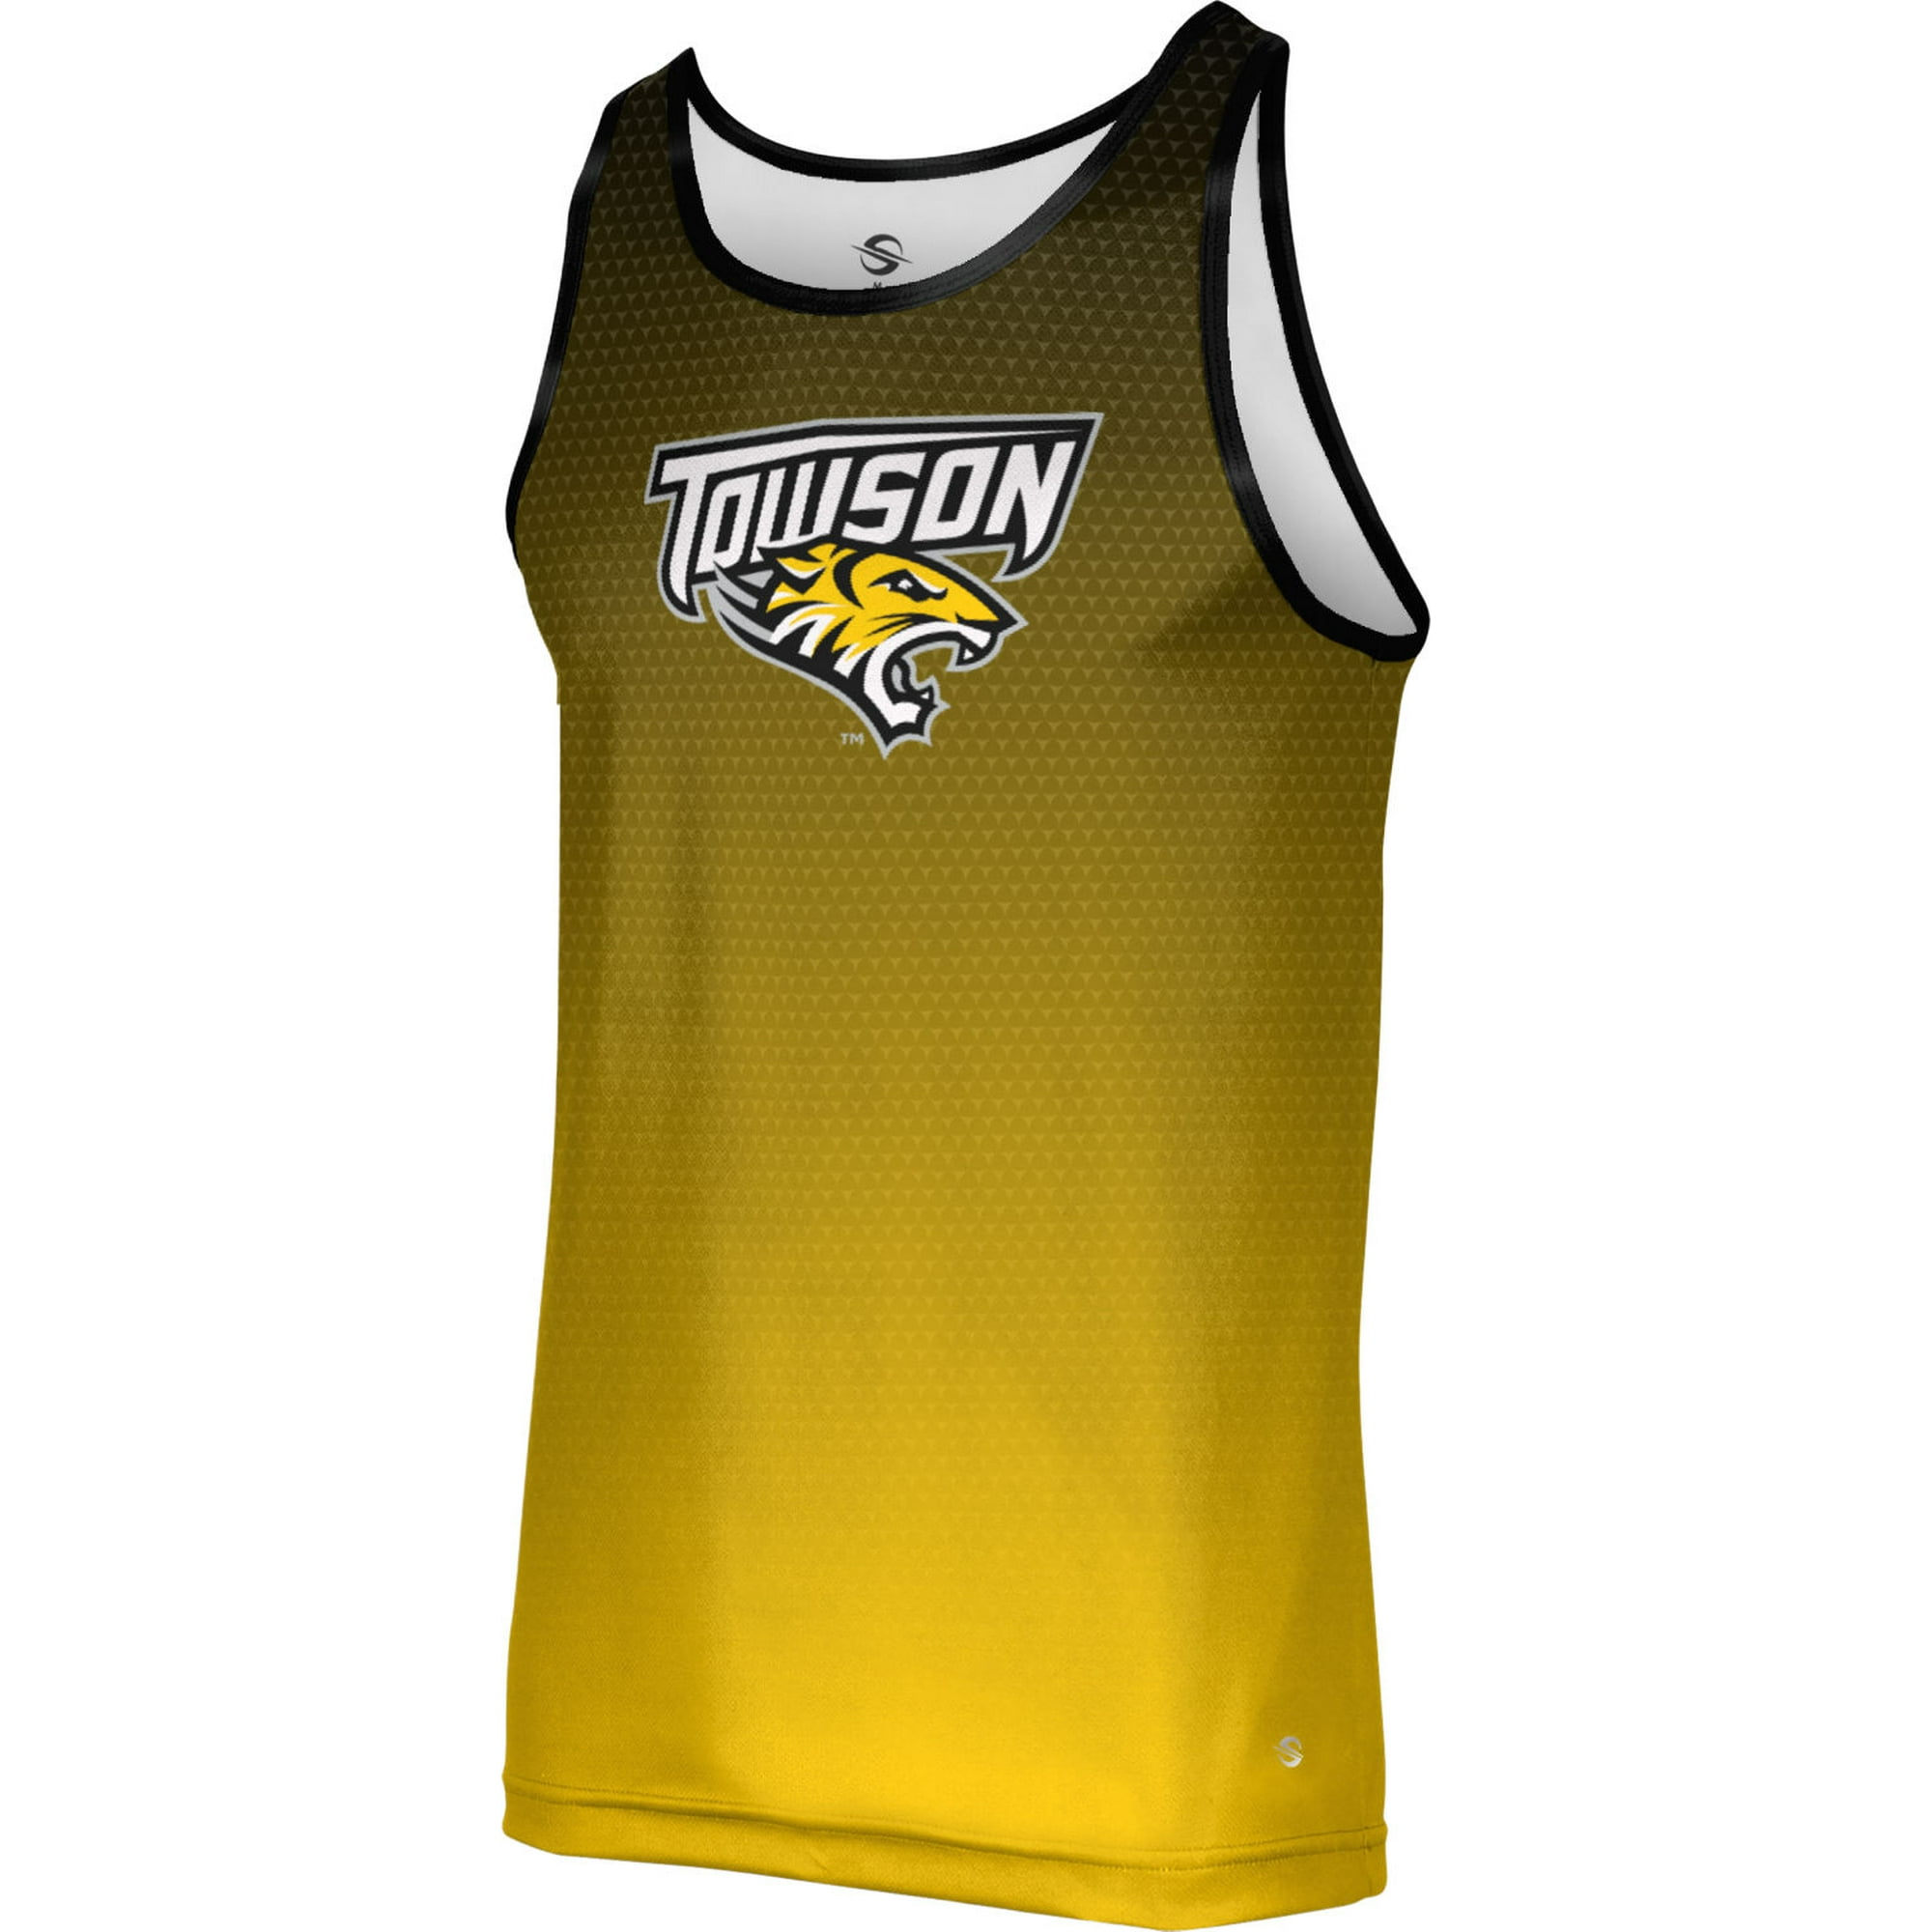 ProSphere Men's Black Towson Tigers Basketball Jersey Size: Small